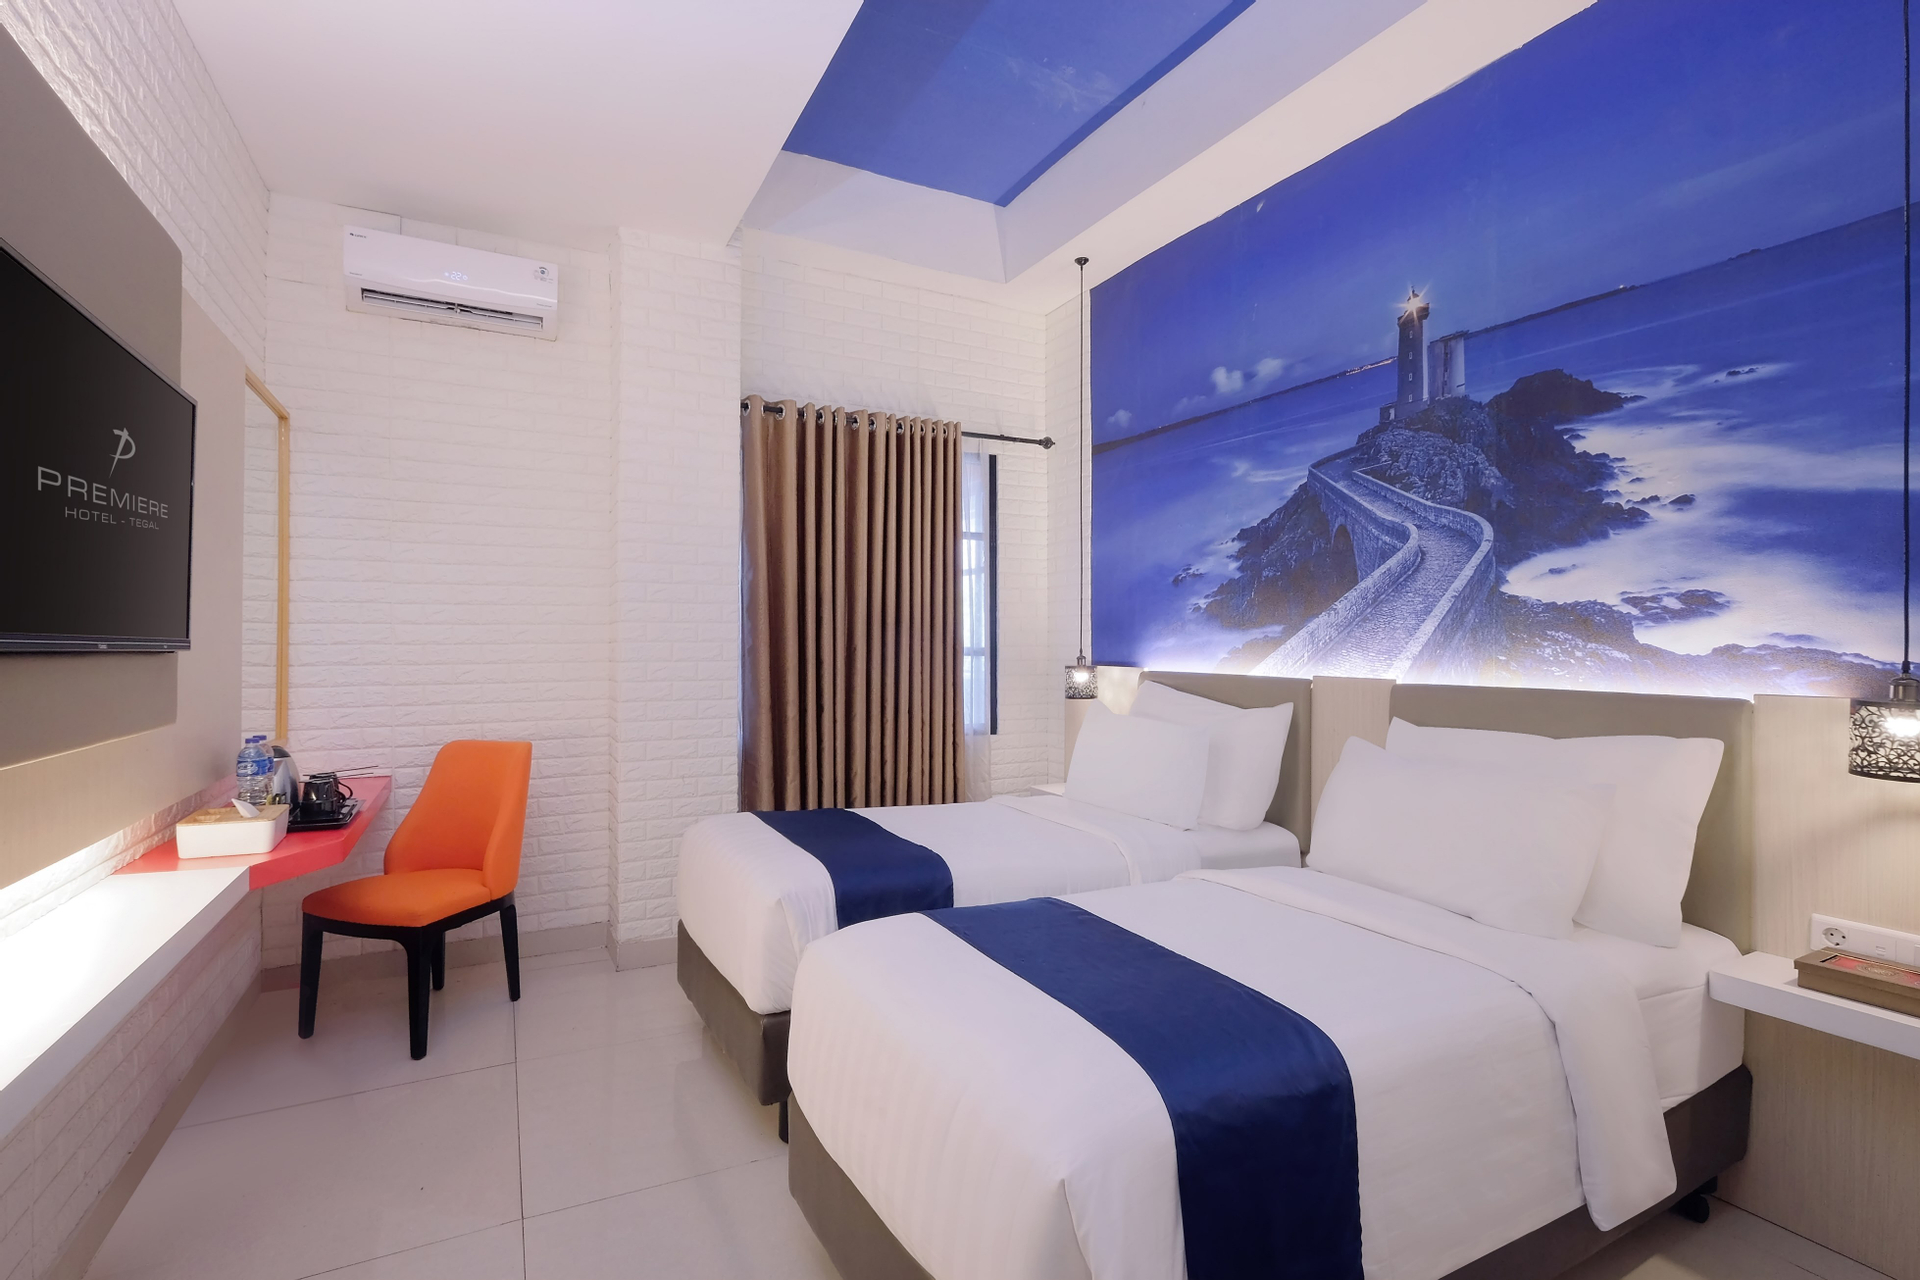 Bedroom 2, Premiere Hotel Tegal Managed by Dafam, Tegal